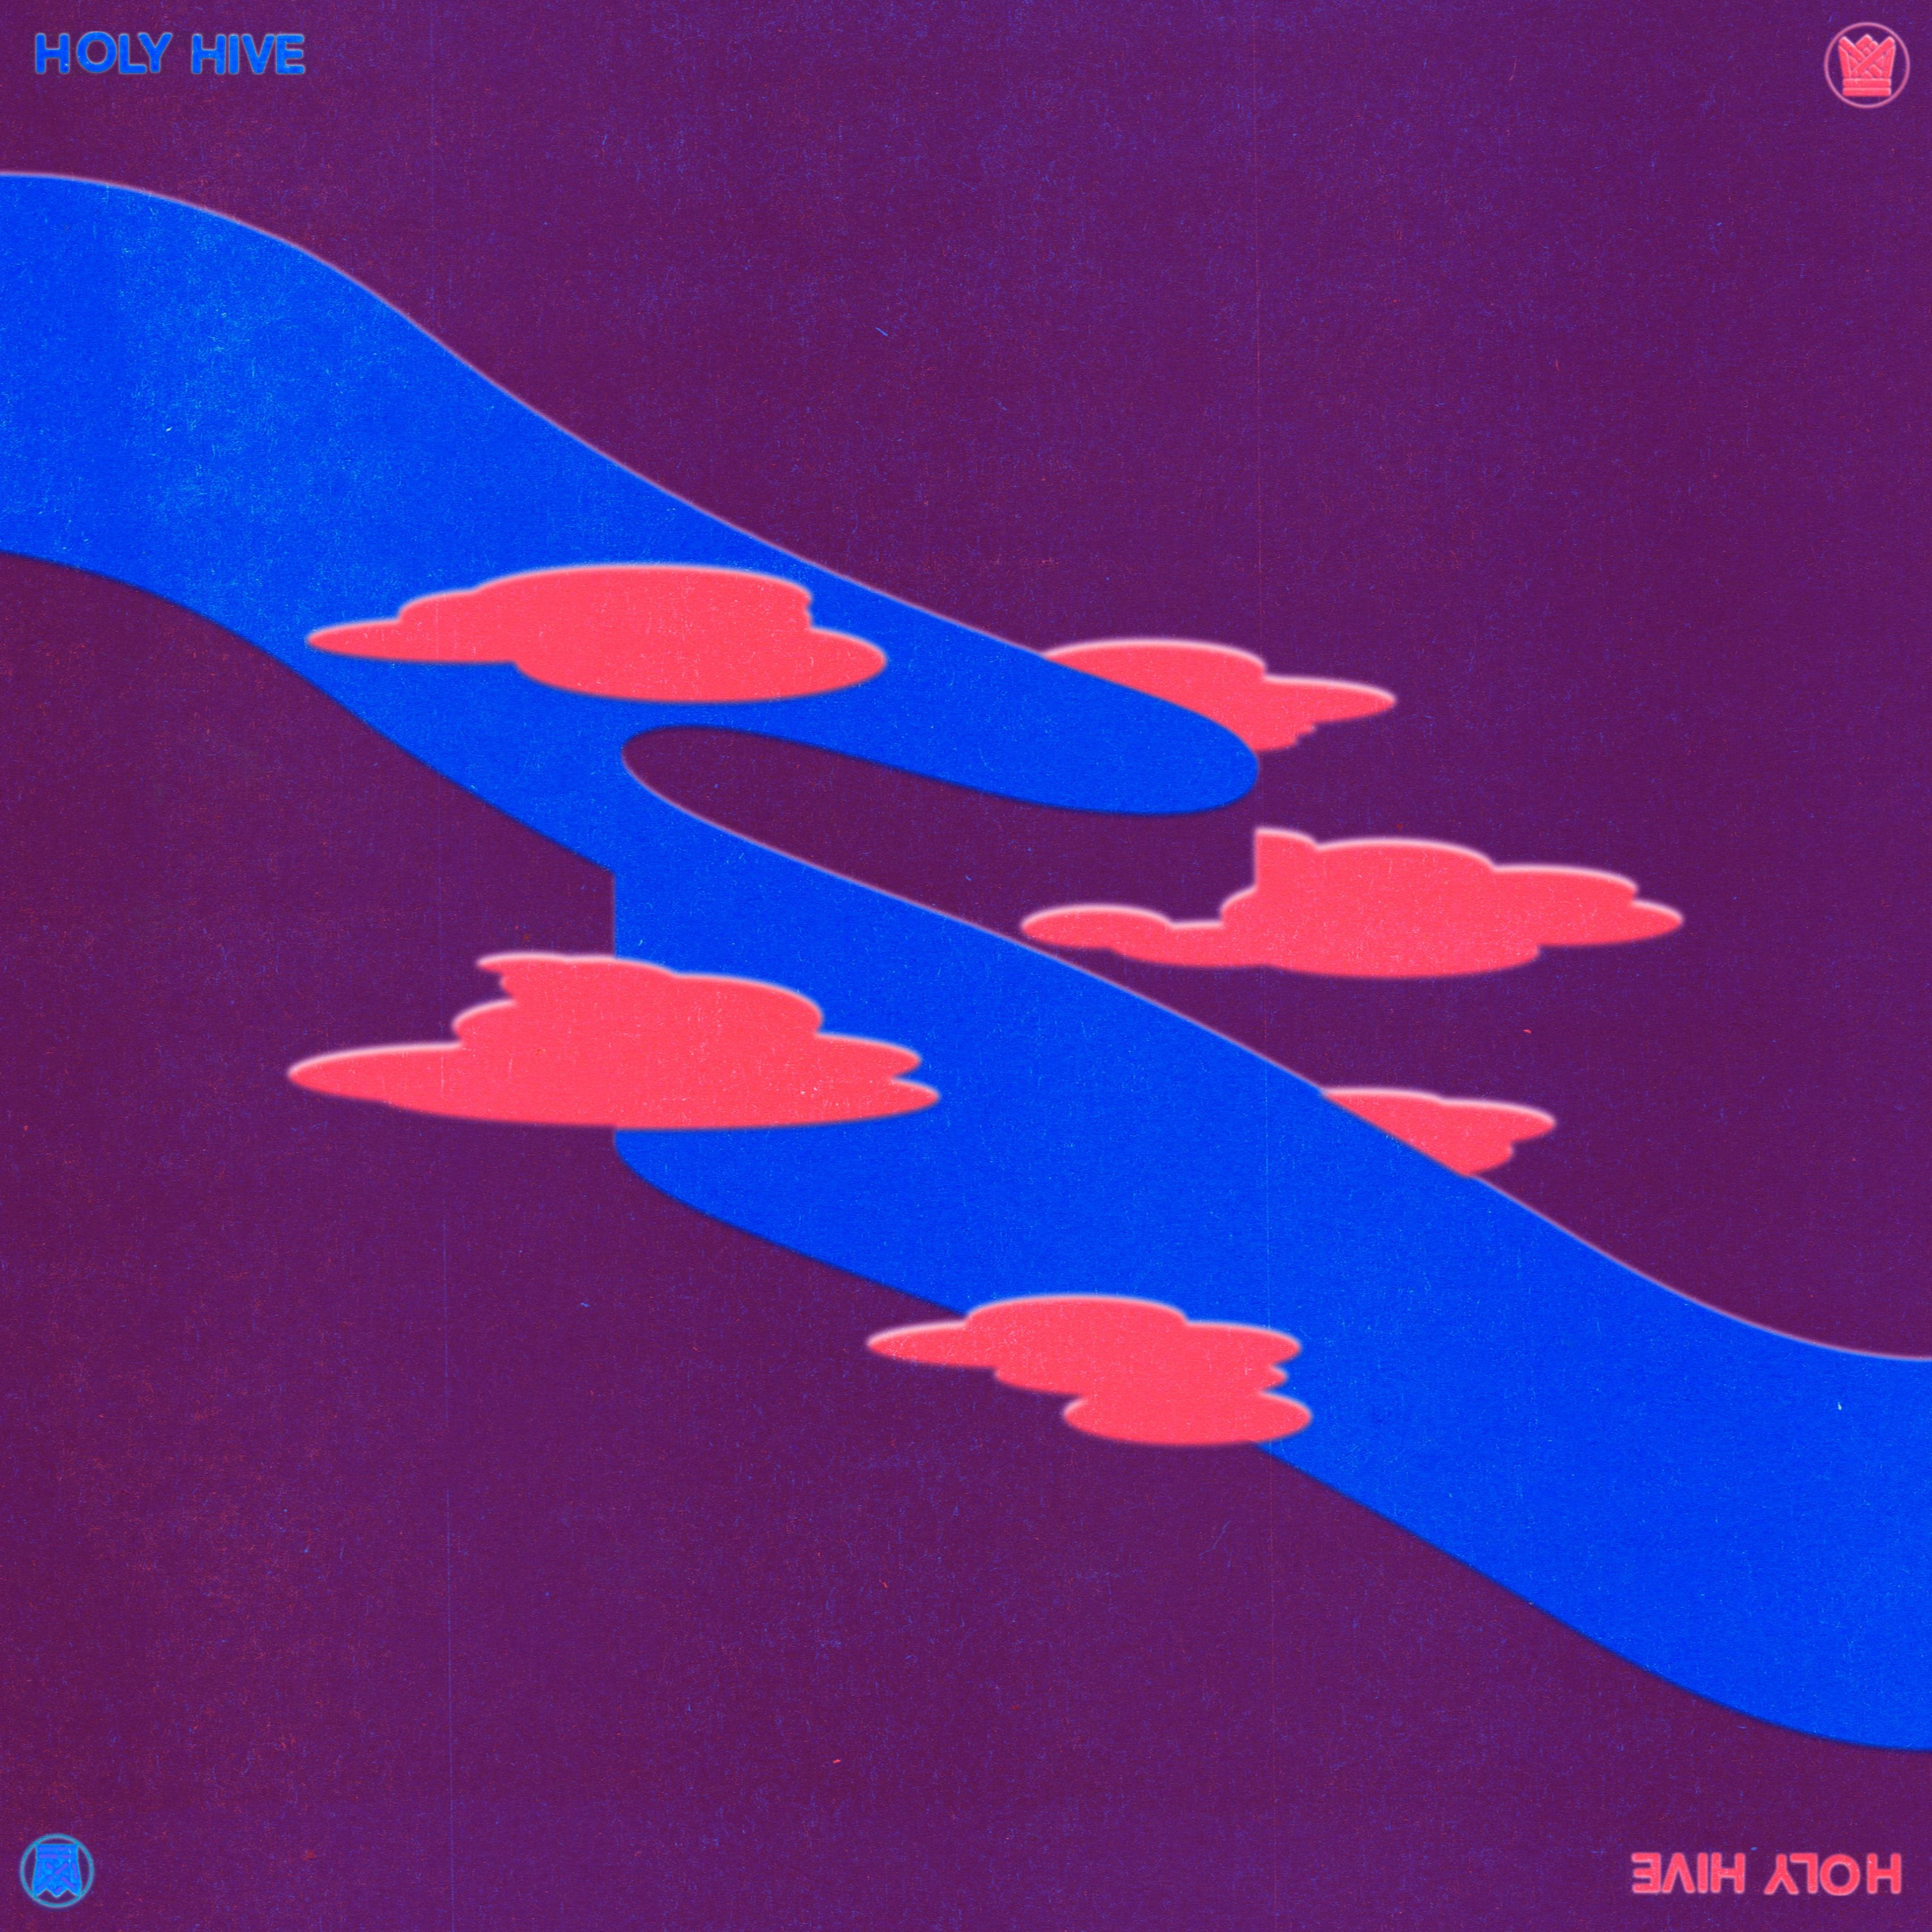 [DAMAGED] Holy Hive - Holy Hive [Indie-Exclusive Translucent Pink w/ Blue Splatter Vinyl]